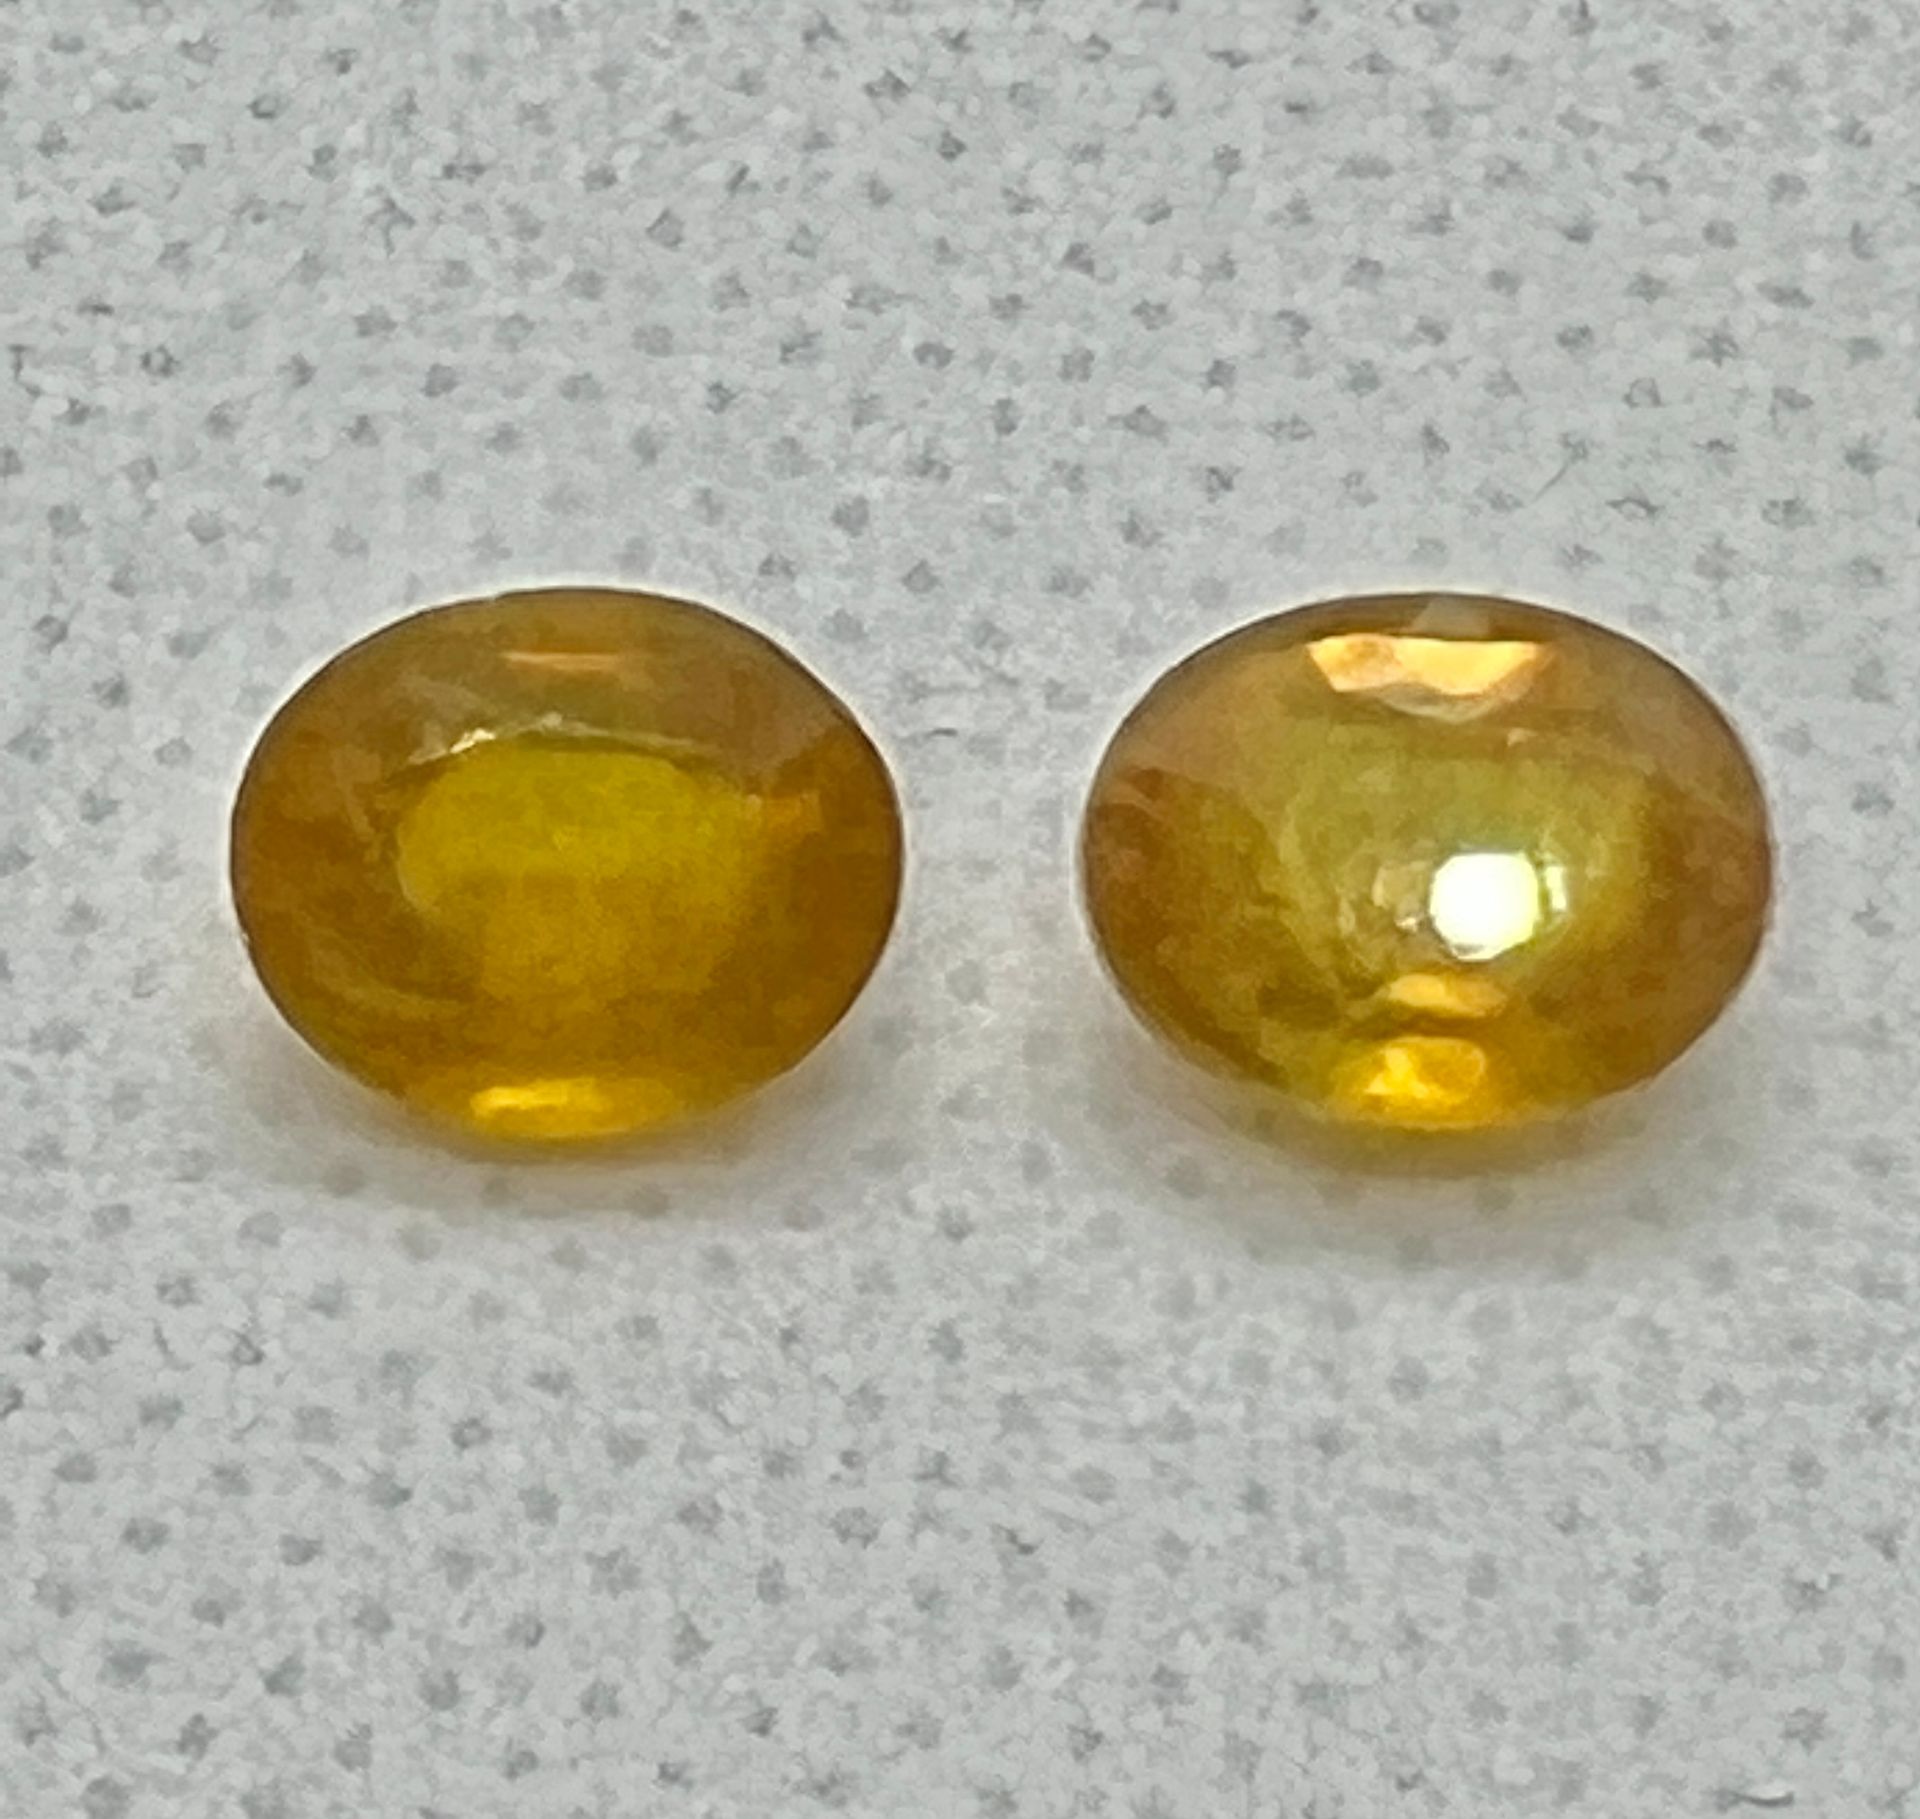 SAPHIRE 2 YELLOW SAPHARS of 5.17 carats ALGT certificate